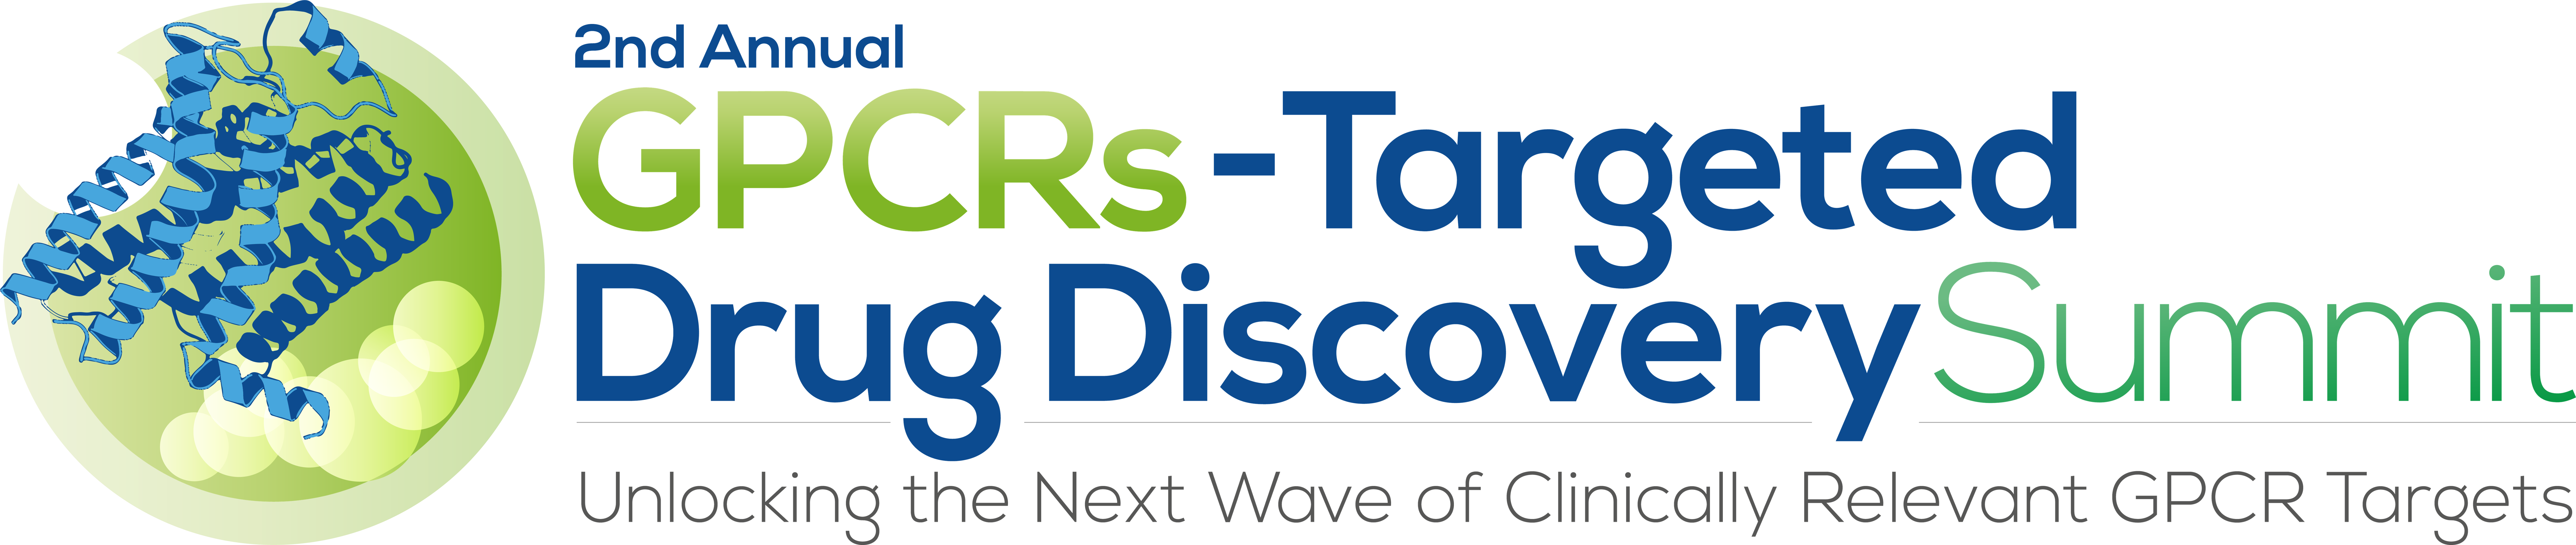 2nd GPCRs - Targeted Drug Discovery Summit logo (002)